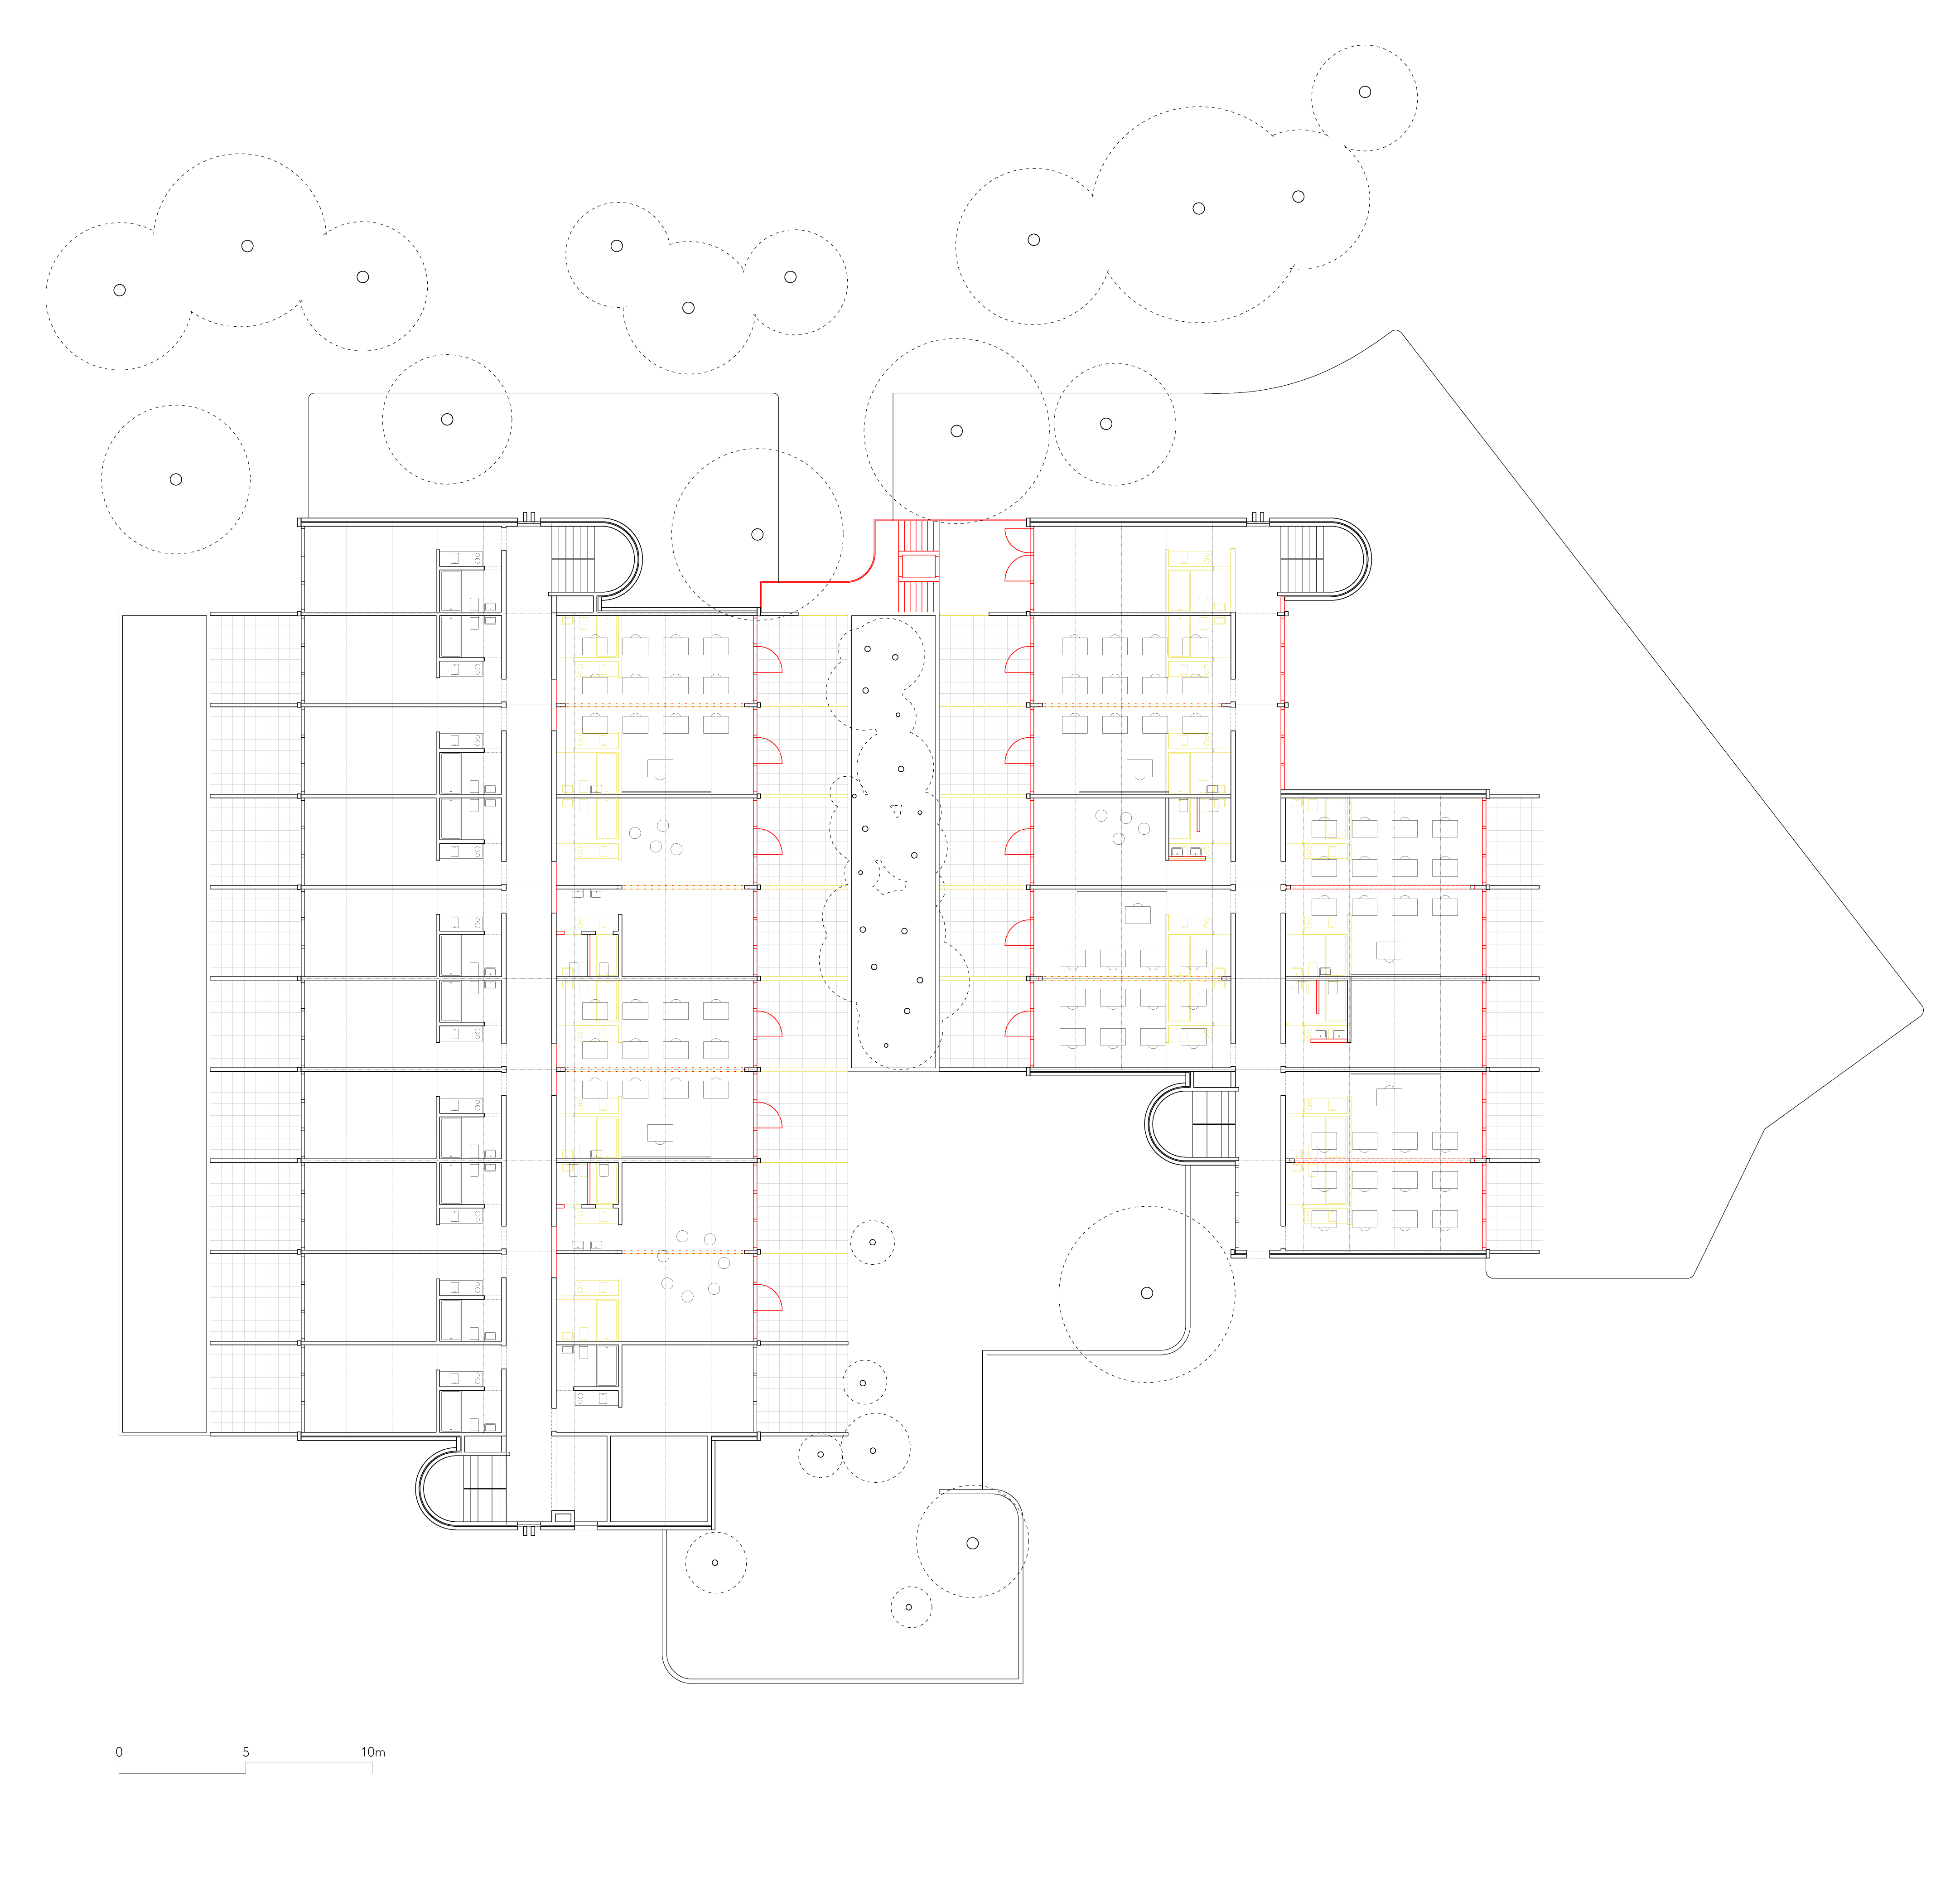 Floorplan. the domestic structure is overlayed with new purpose